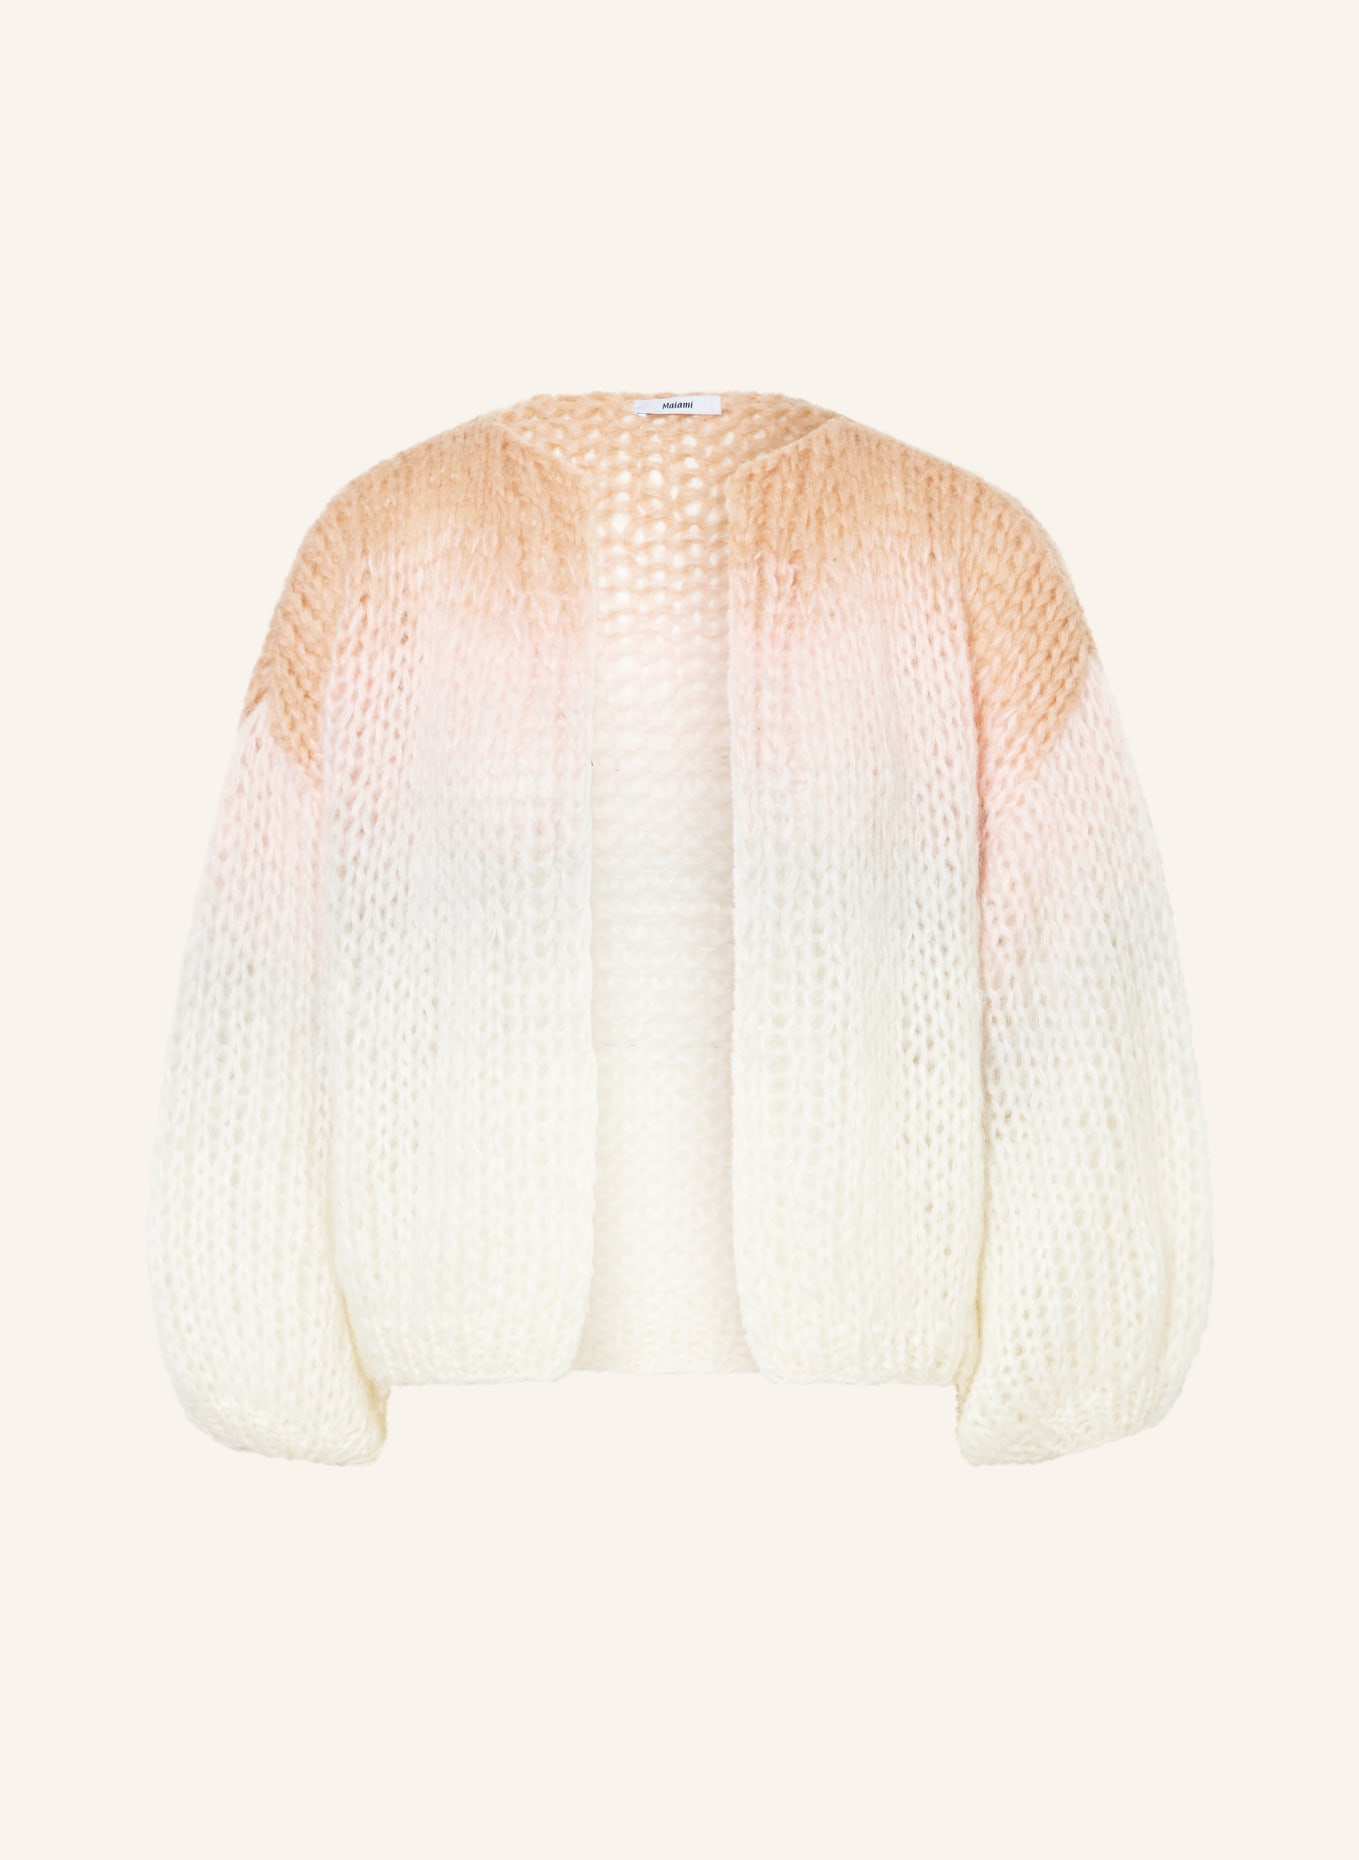 MAIAMI Oversized knit cardigan with mohair, Color: CREAM/ LIGHT PINK/ LIGHT GRAY (Image 1)